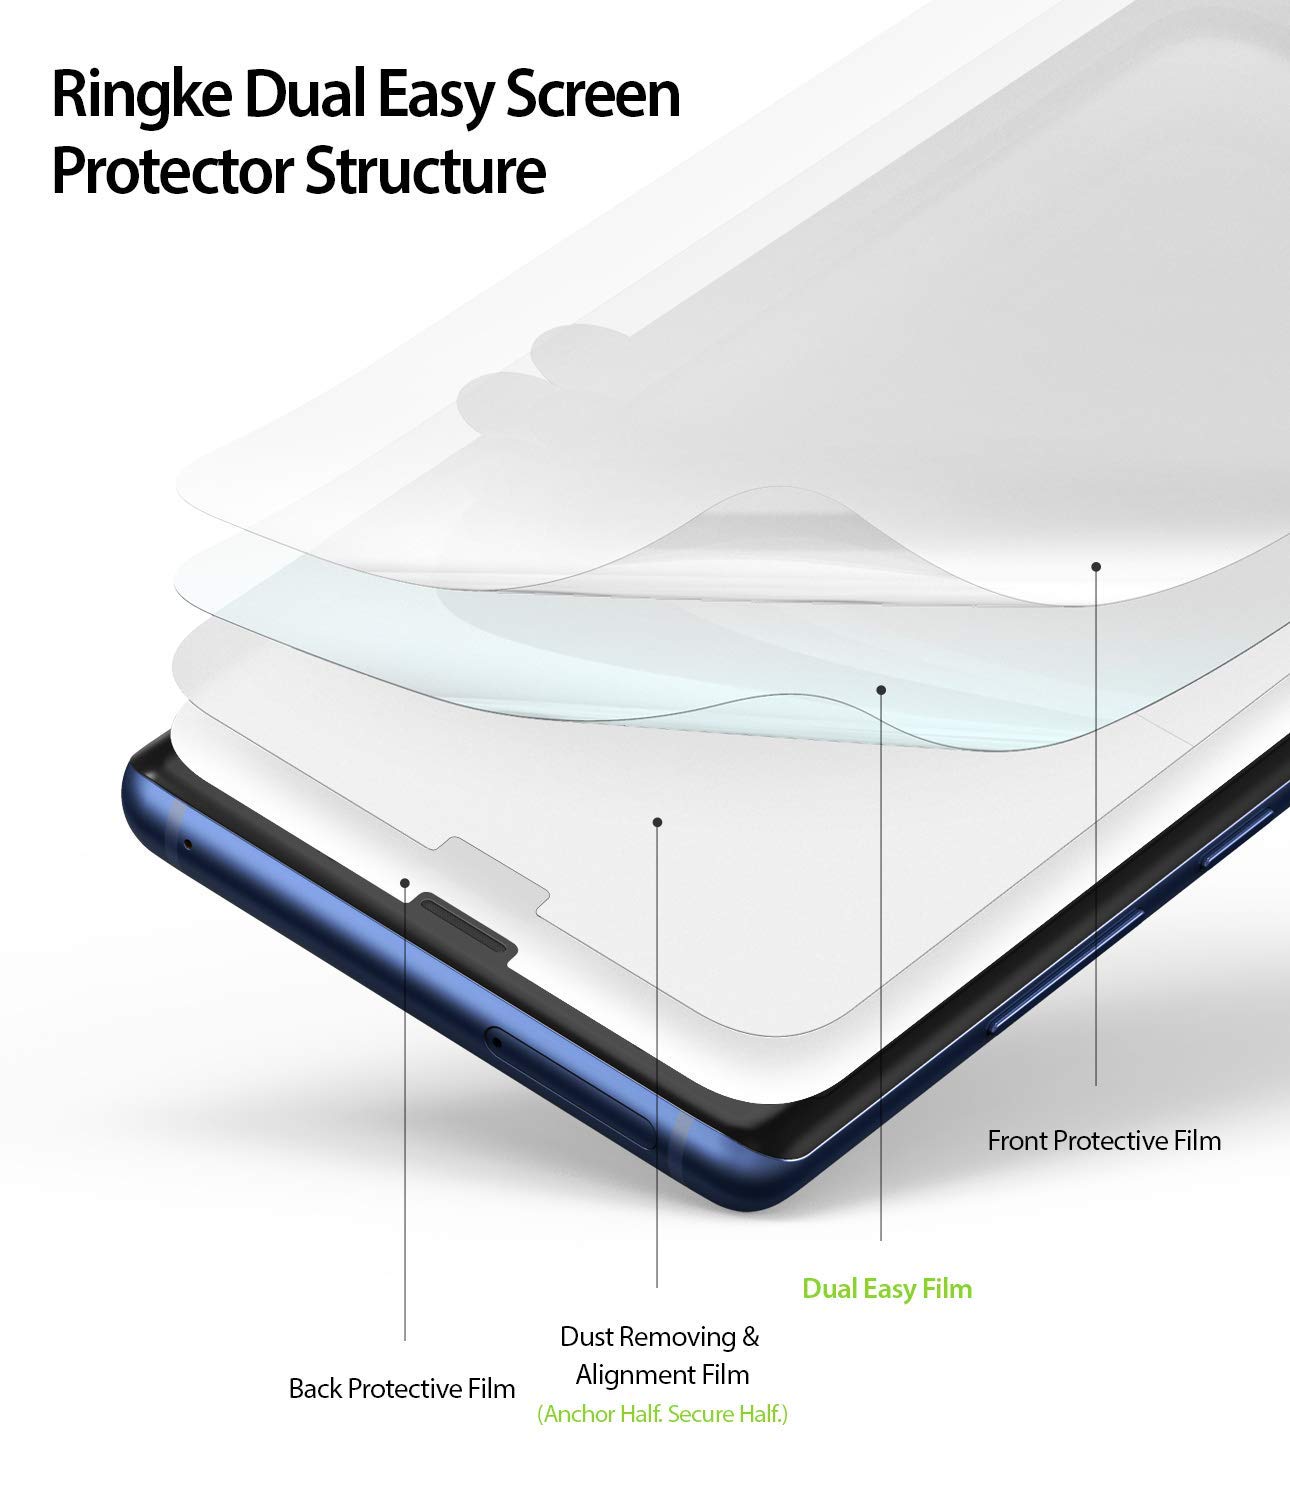 4 layer construction PET film screen protector for galaxy note 8